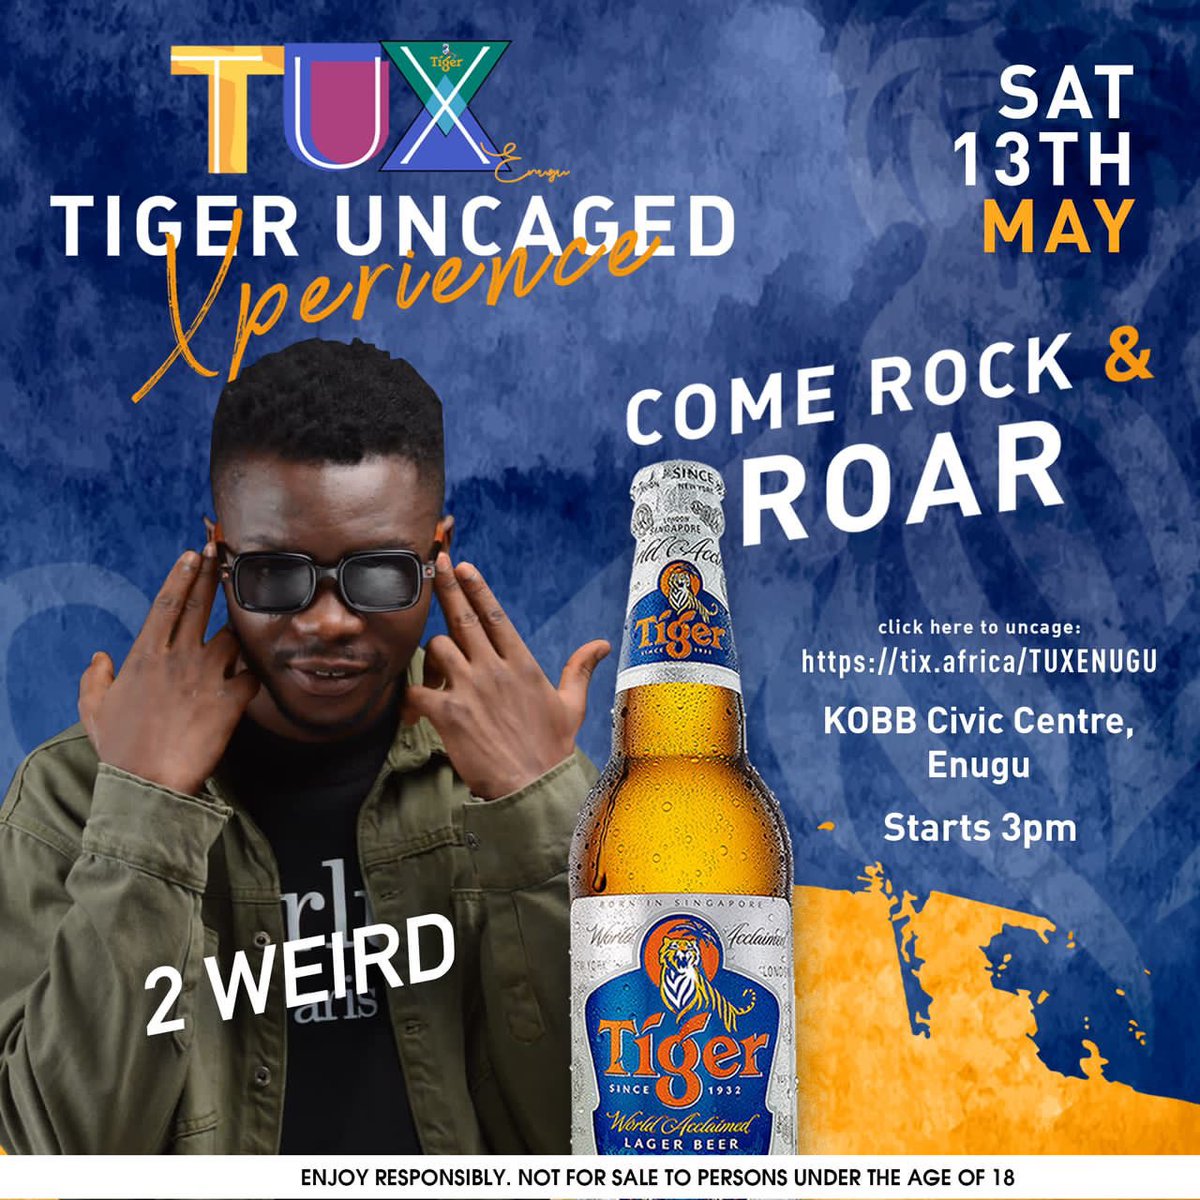 So guys these fine home grown artists will be at KOBB CIVIC CENTER for #TigerUncagedXperience tomorrow come out and have maximum fun.
#LiveUncaged 
Get your ticket here tix.africa/TUXENUGU